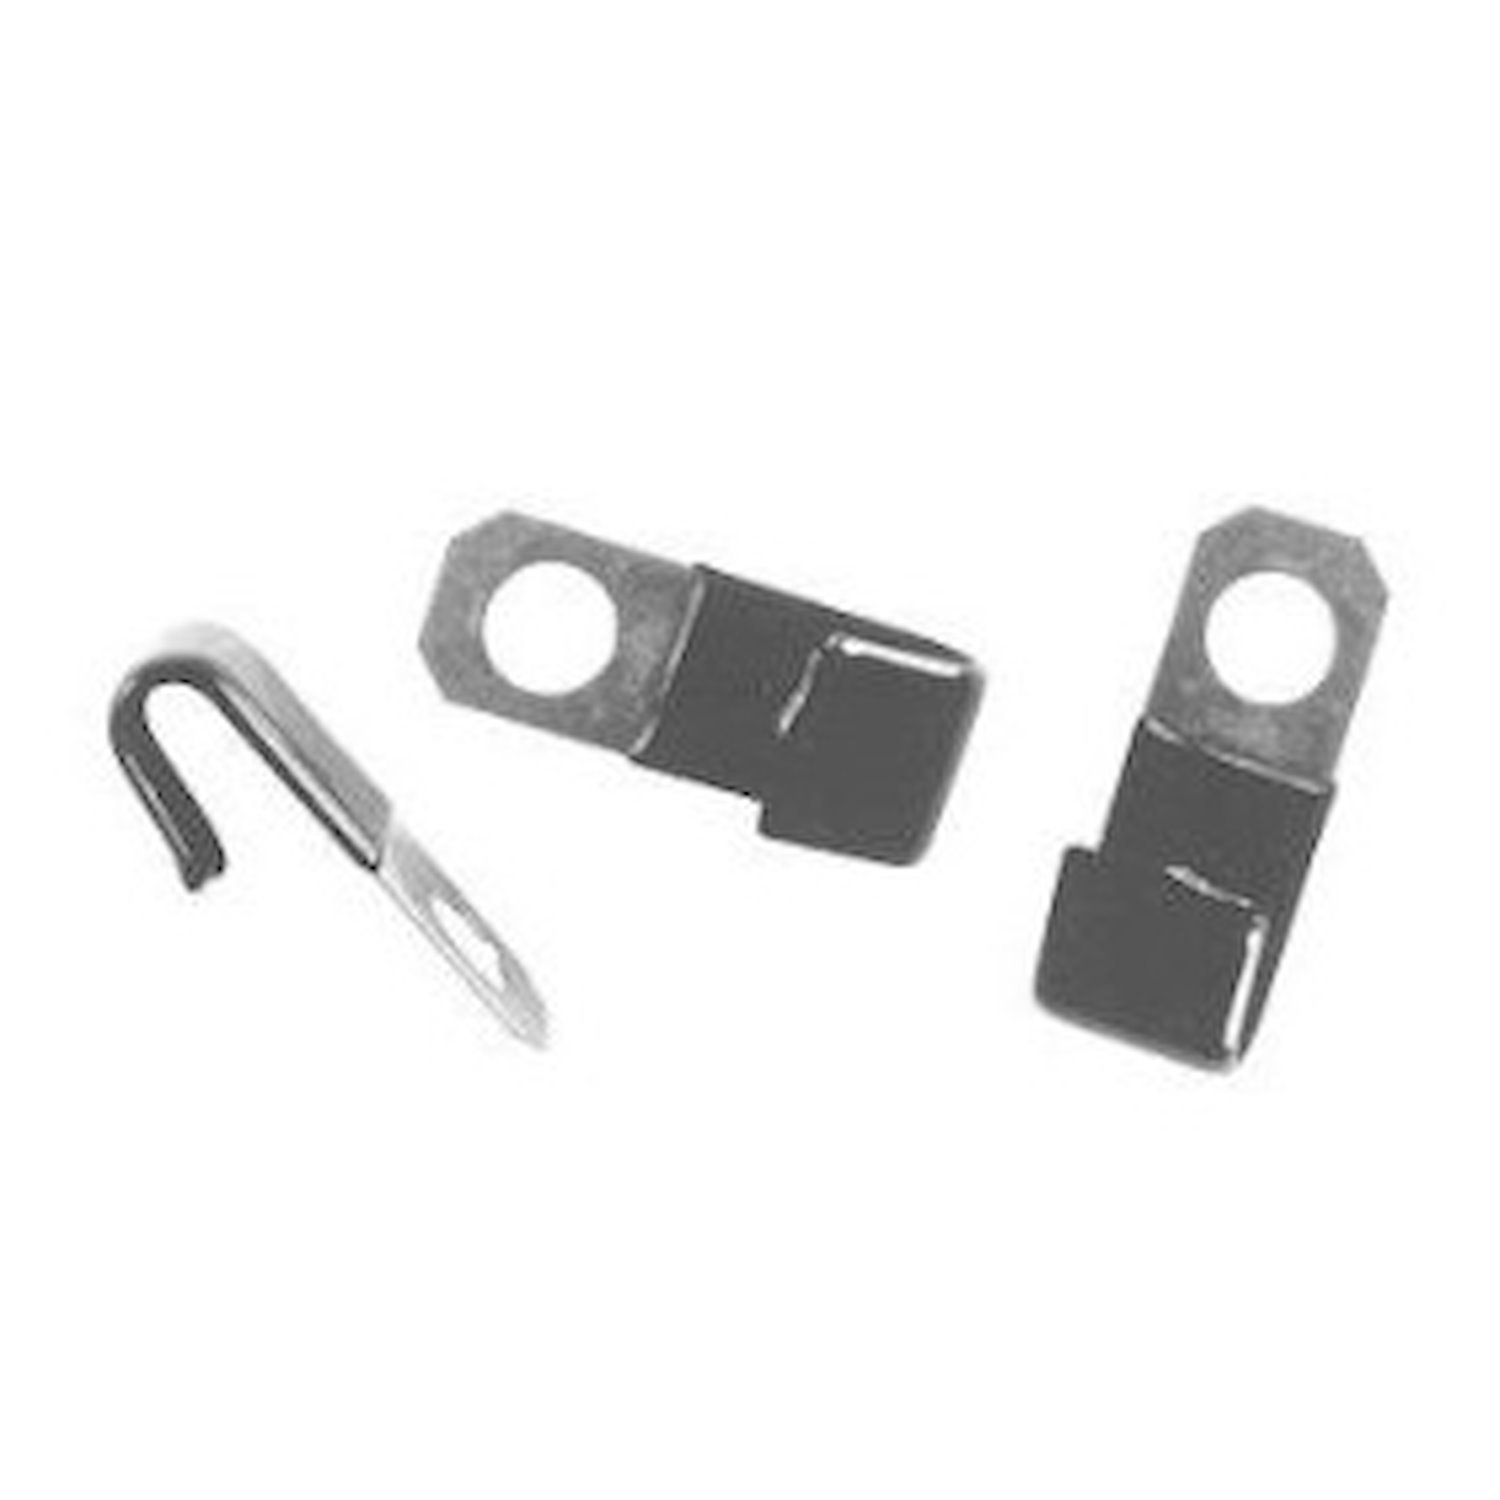 64-73 WIRE HARNESS CLIPS